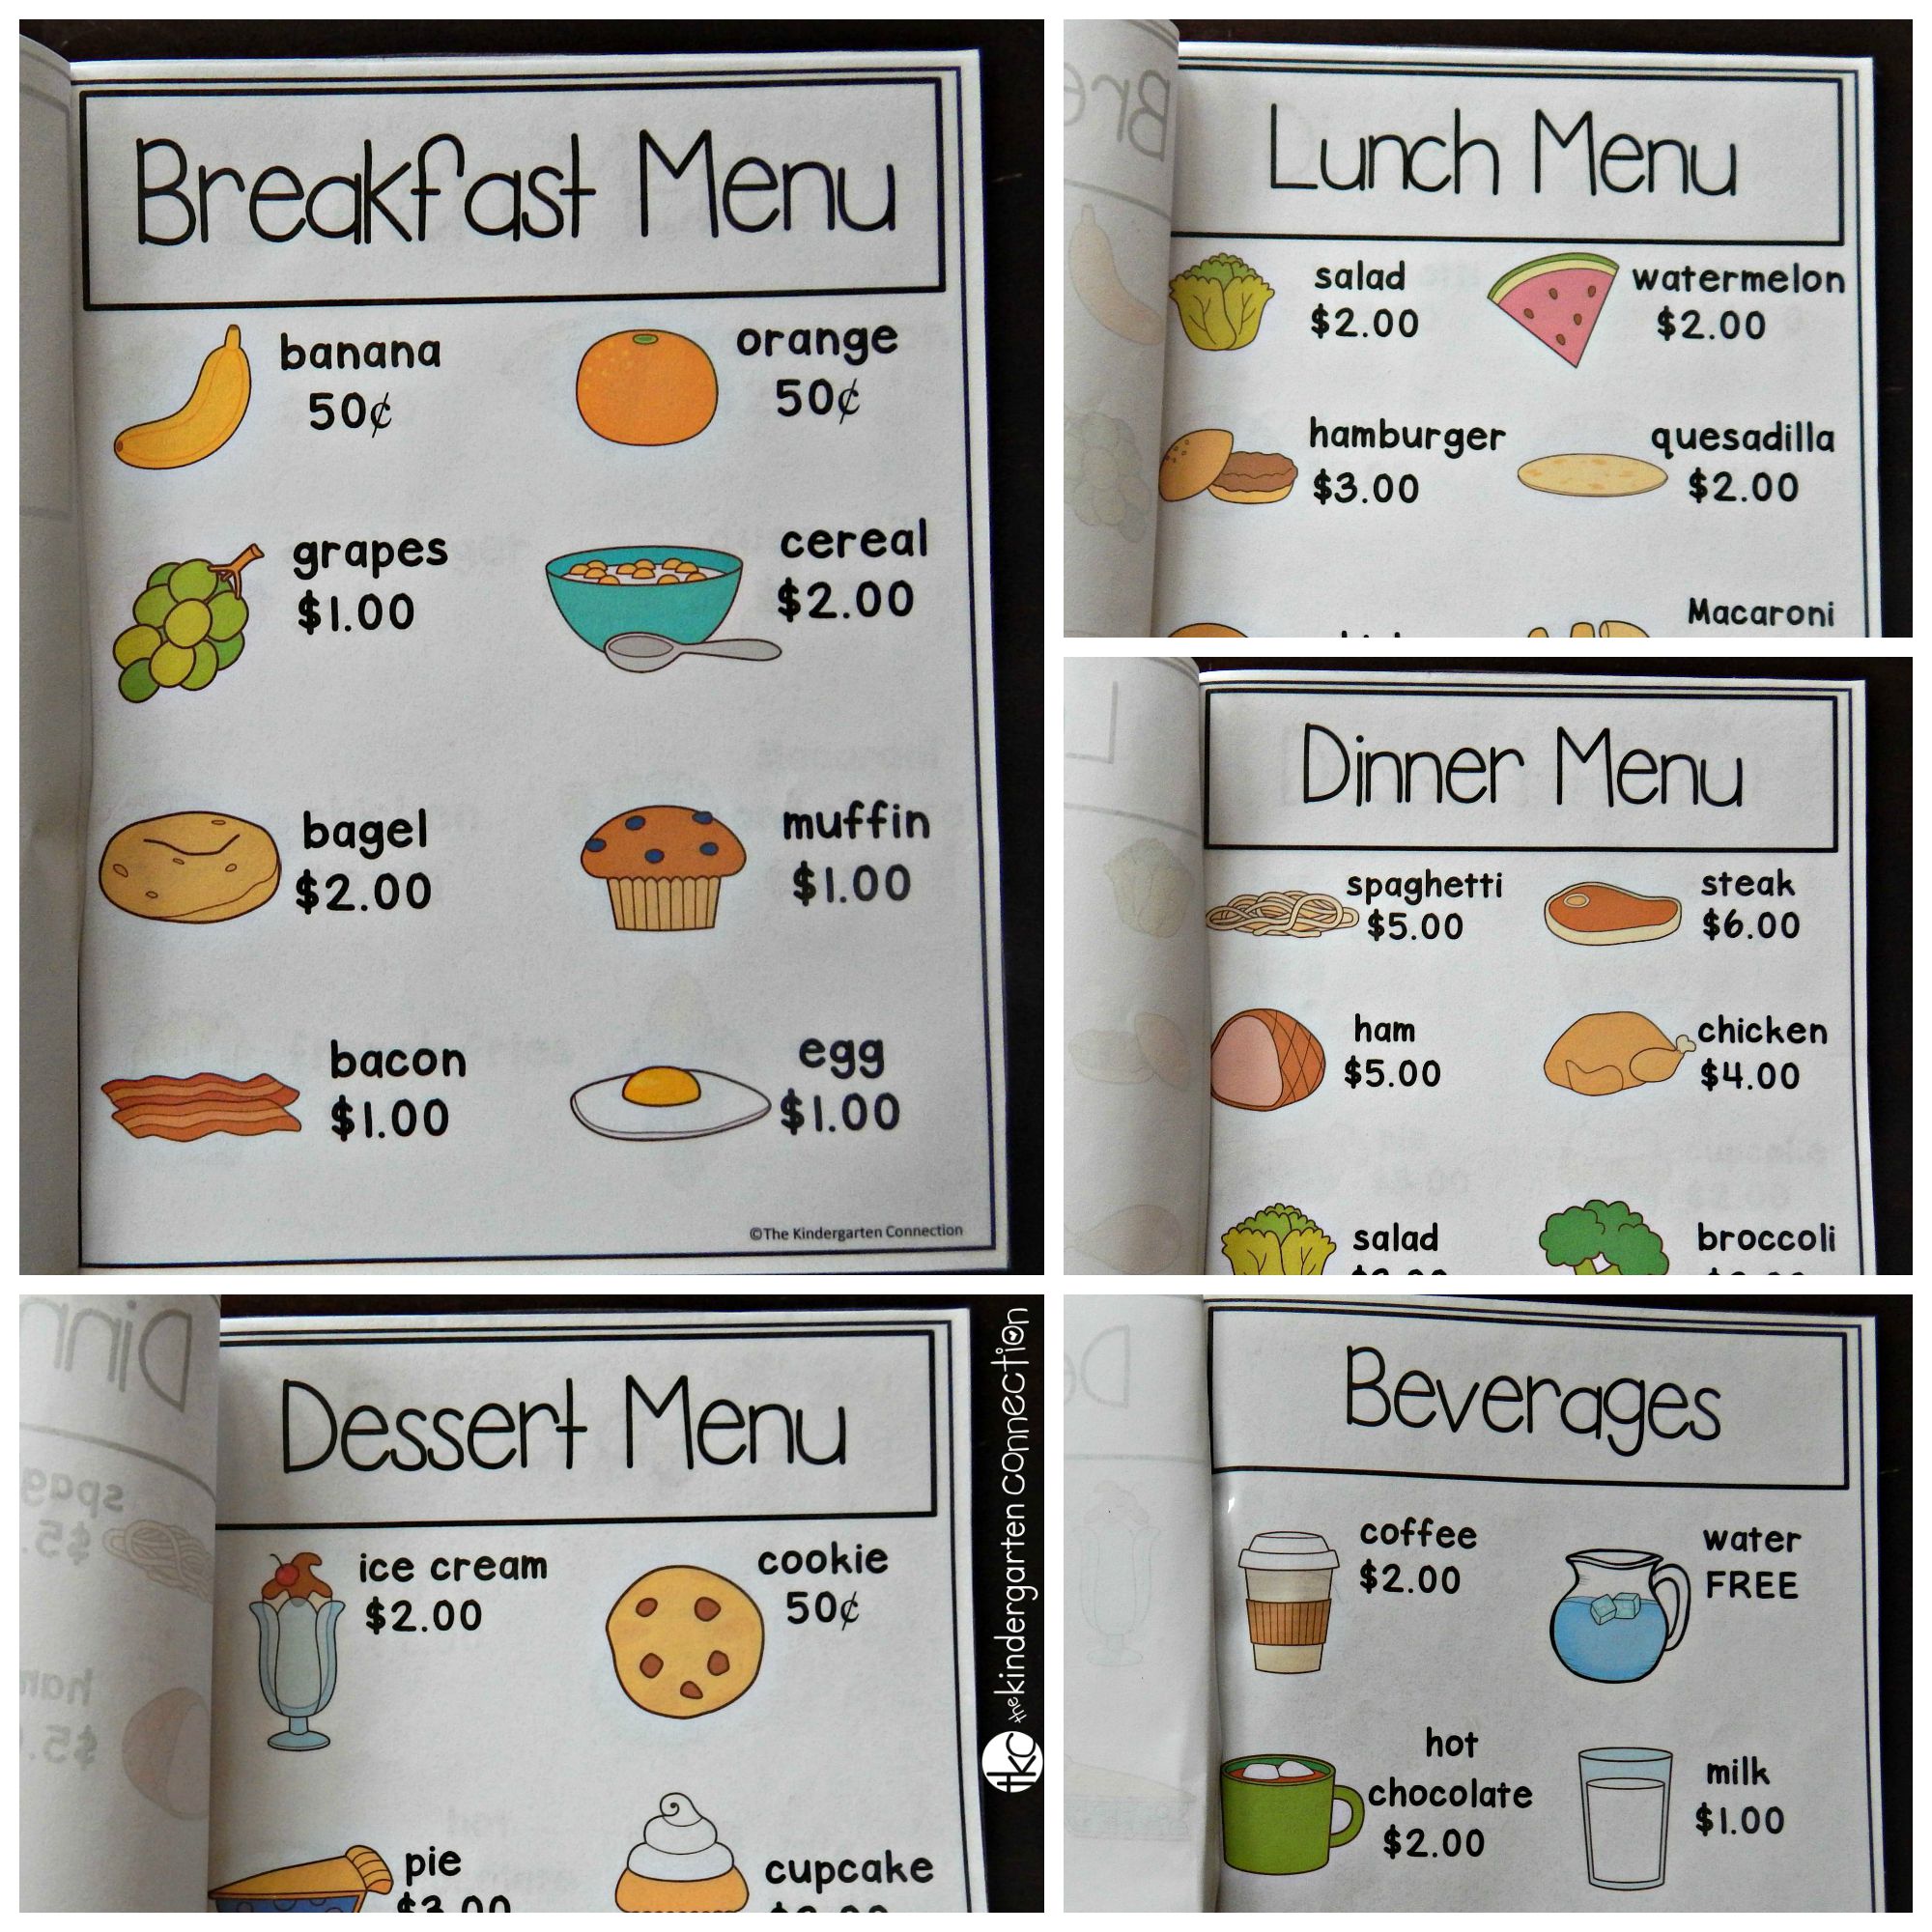 Restaurant Dramatic Play FREE Printables for Early Childhood